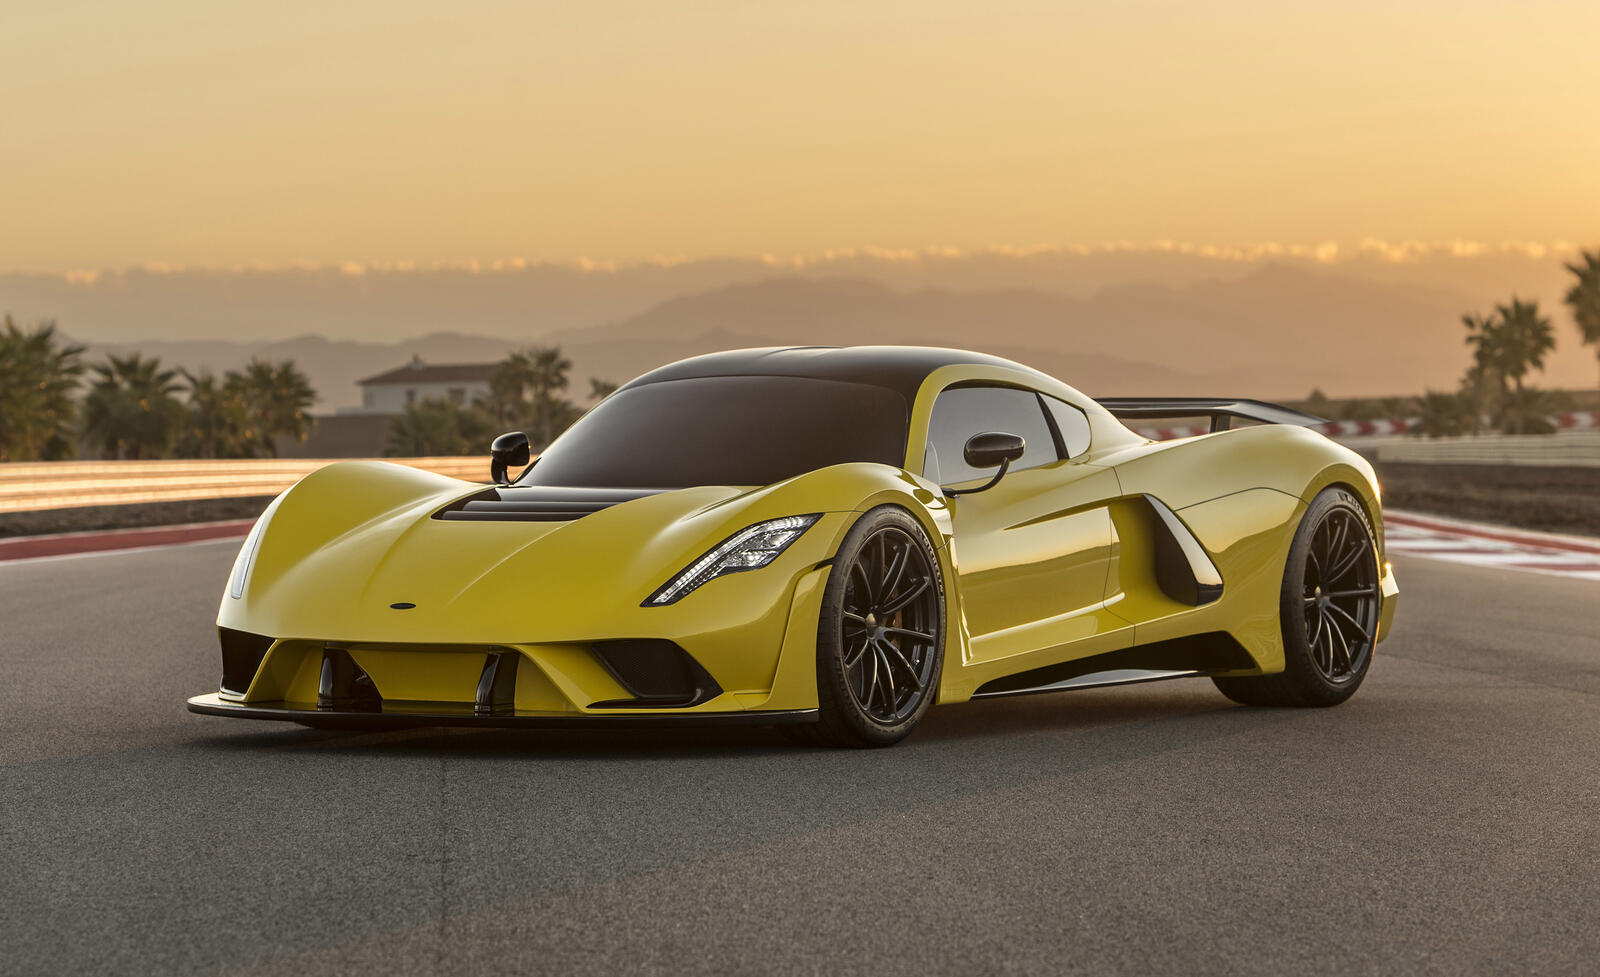 Wallpapers Hennessey 2017 cars cars on the desktop